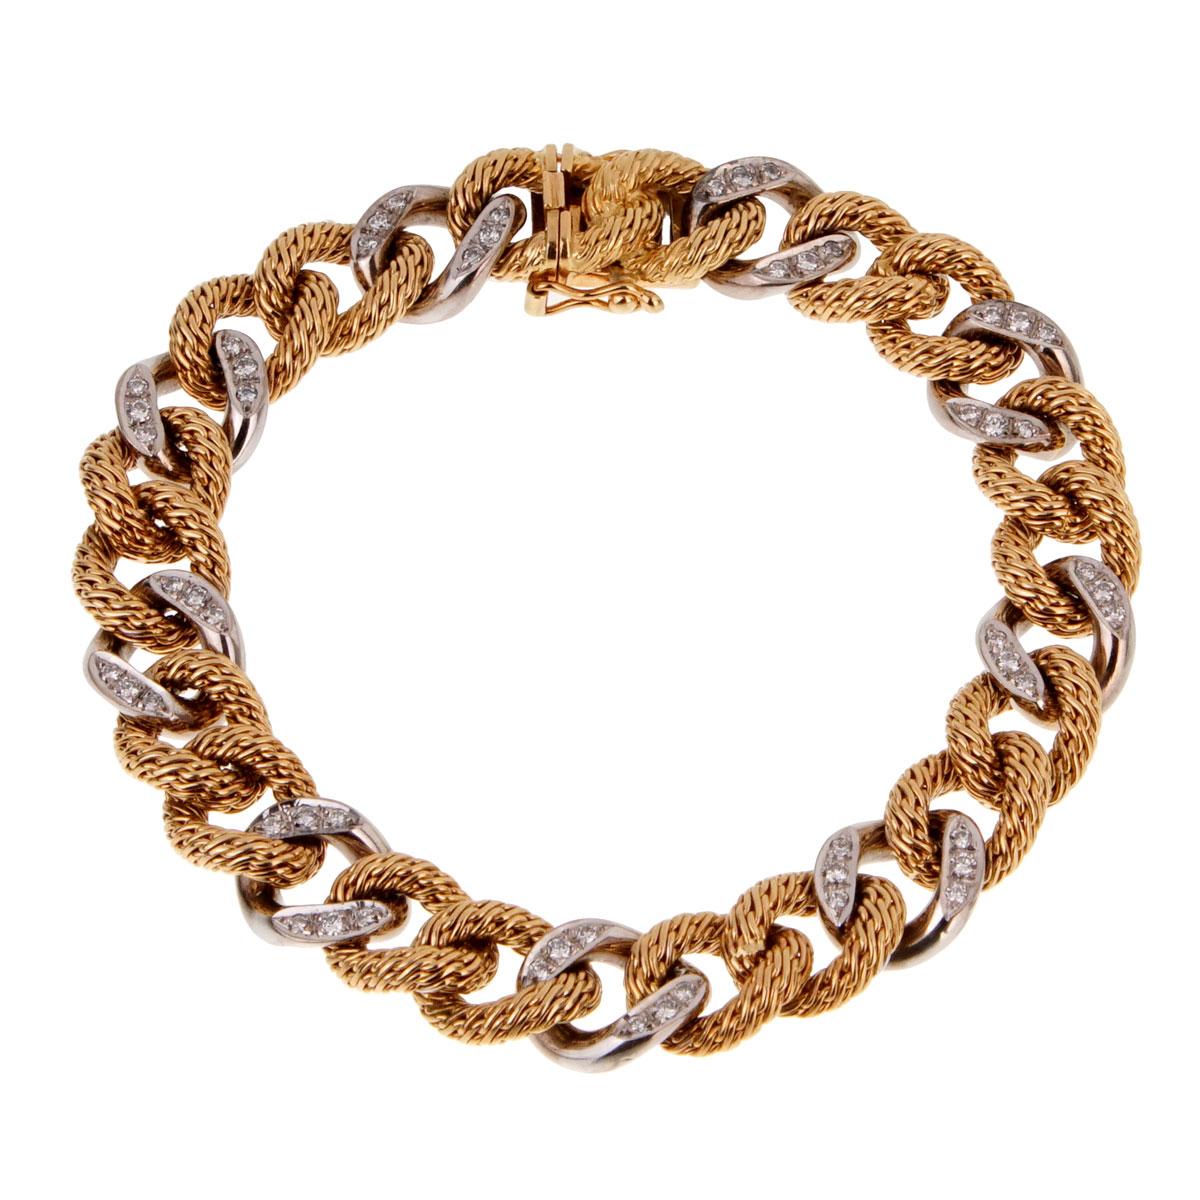 An incredible bracelet by Piaget featuring 18k yellow gold braided links and alternating white gold links adorned with round brilliant cut diamonds.

Length 7 1/4